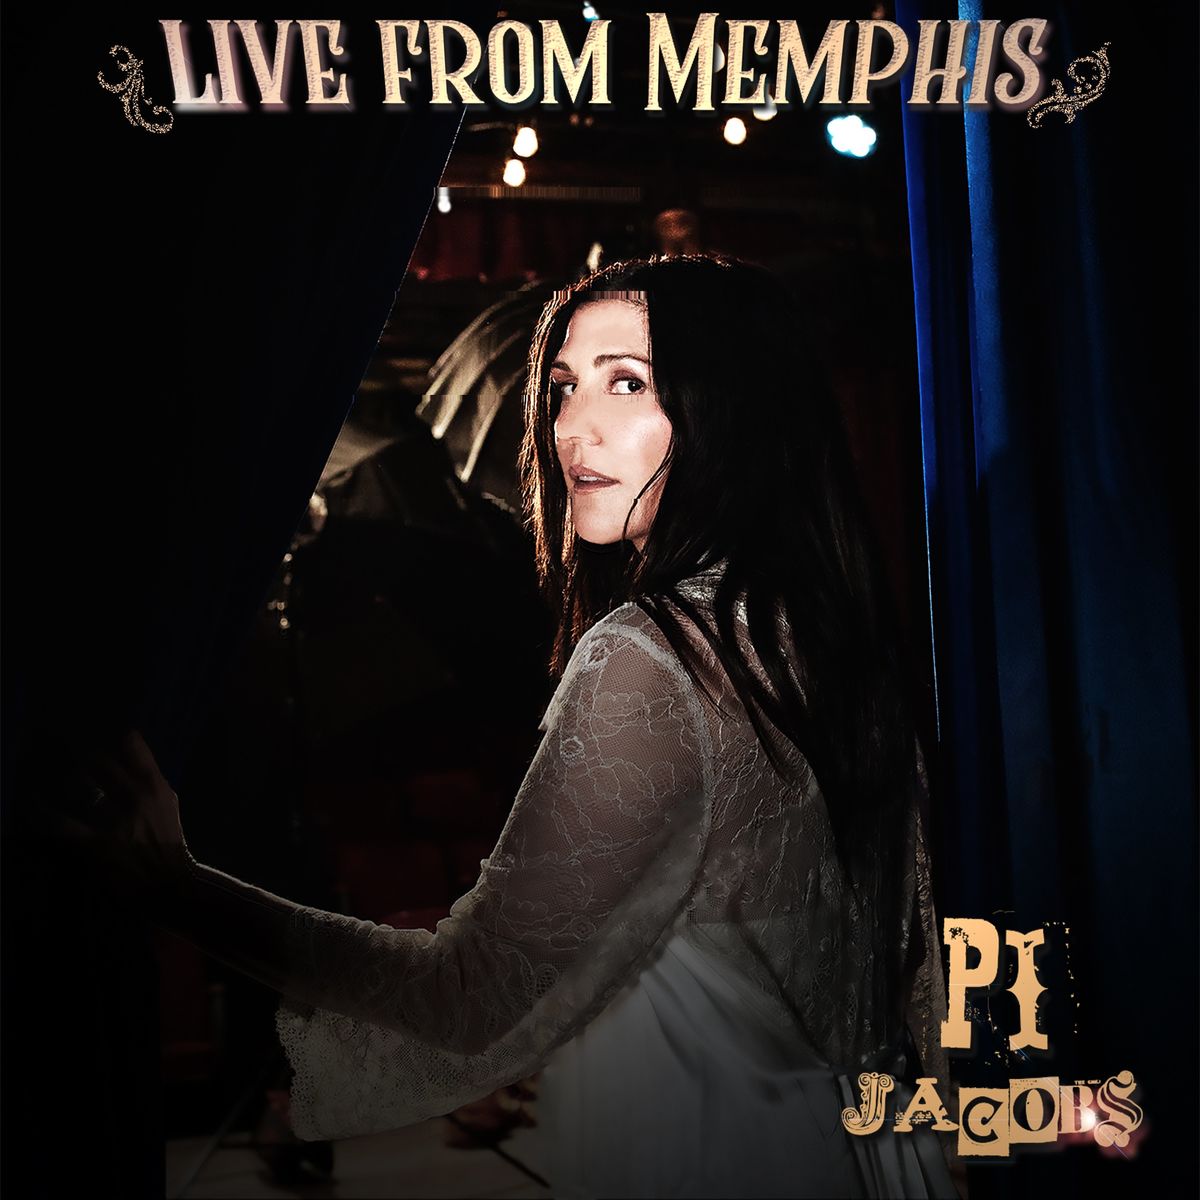 Pi Jacobs - Live From Memphis